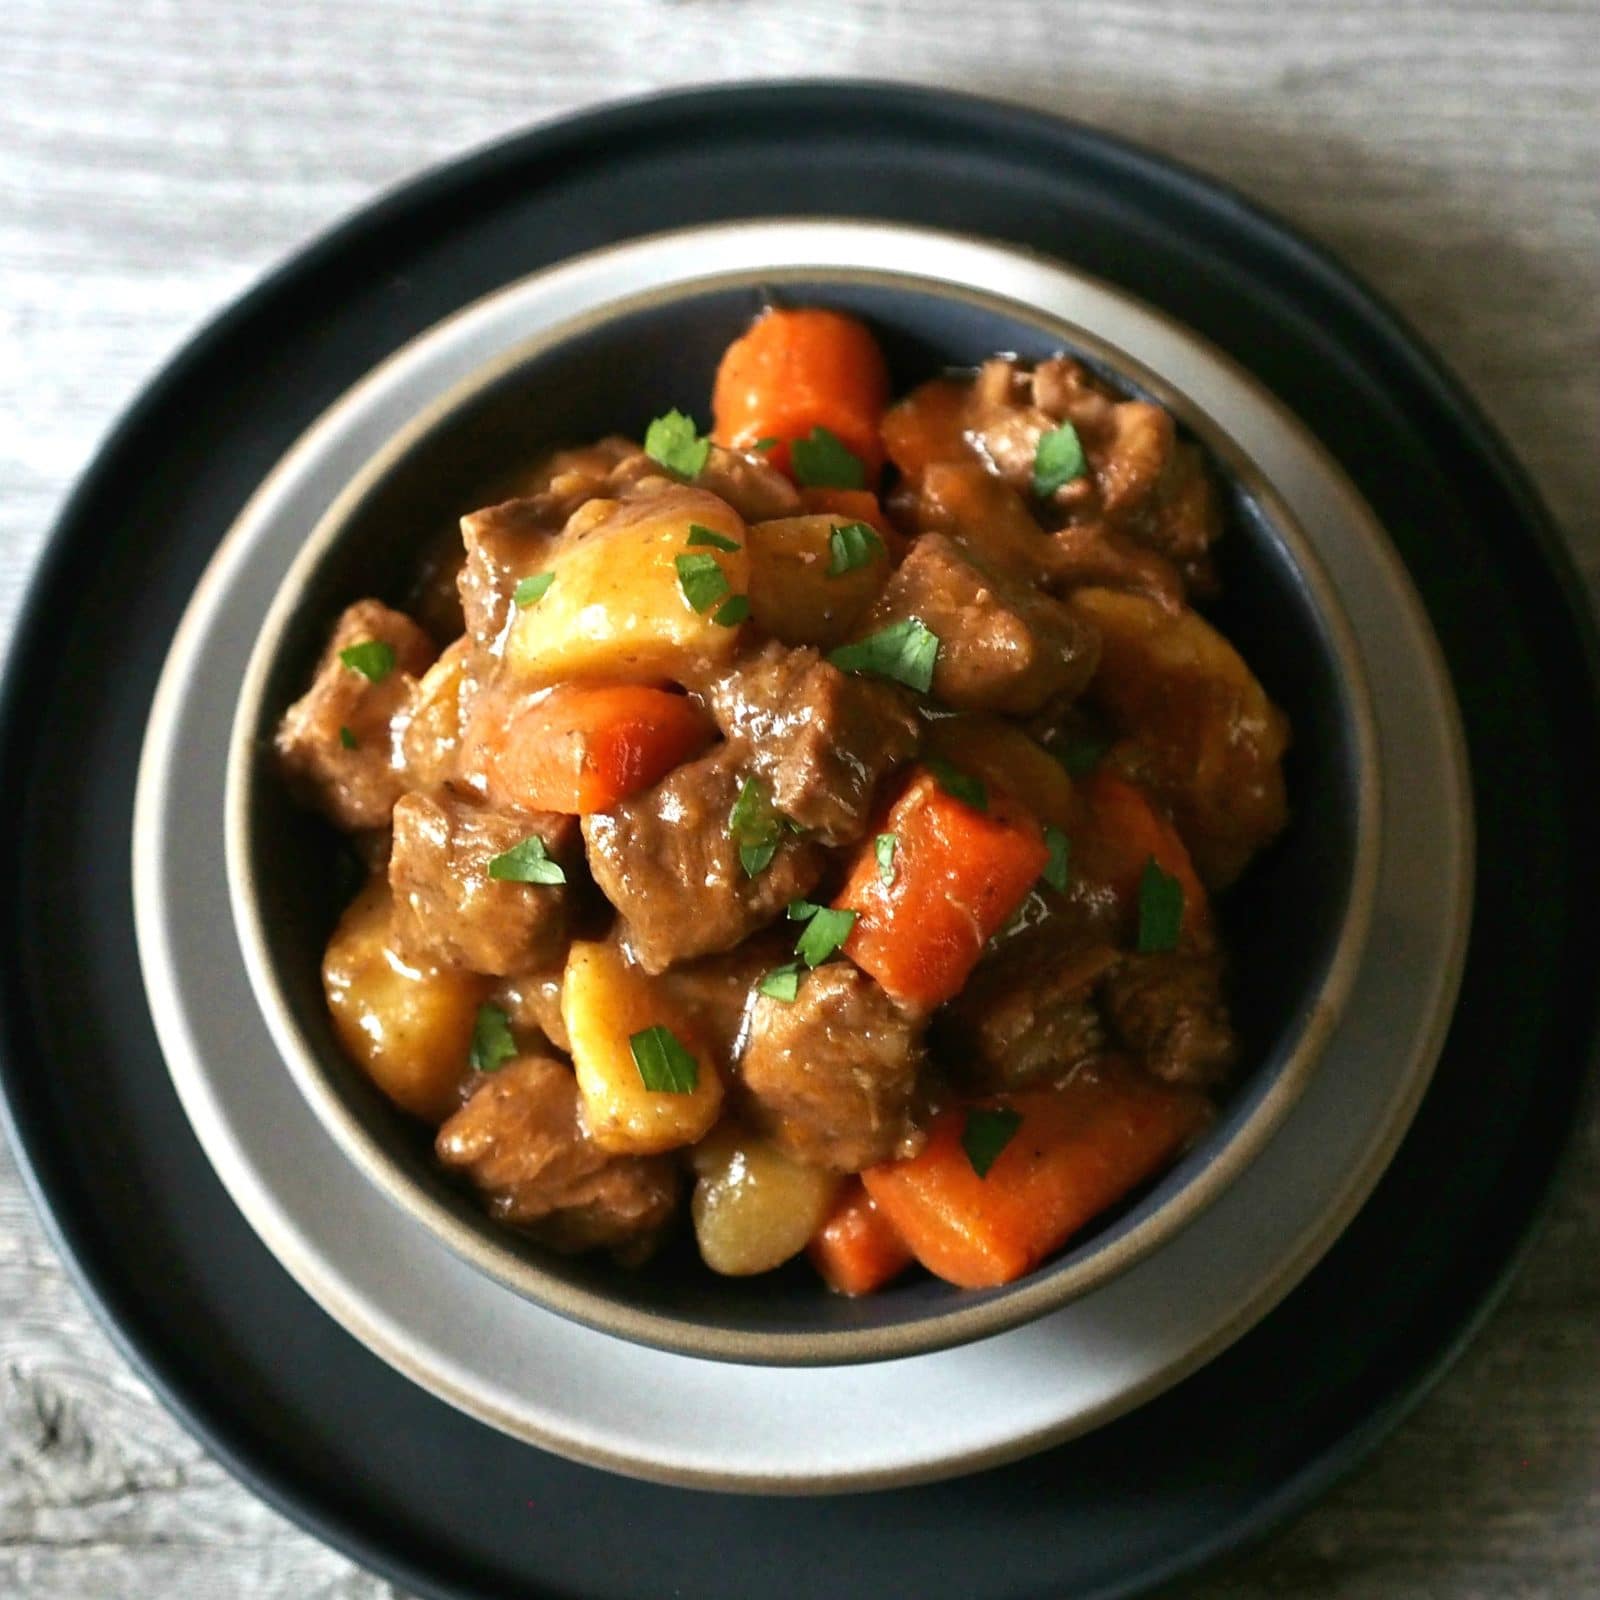 "Stewed" Beef Stew. A little bit of wine, a bottle of beer, beef, vegetables and the perfect seasonings work together to create this unforgettable stew. Simply Sated